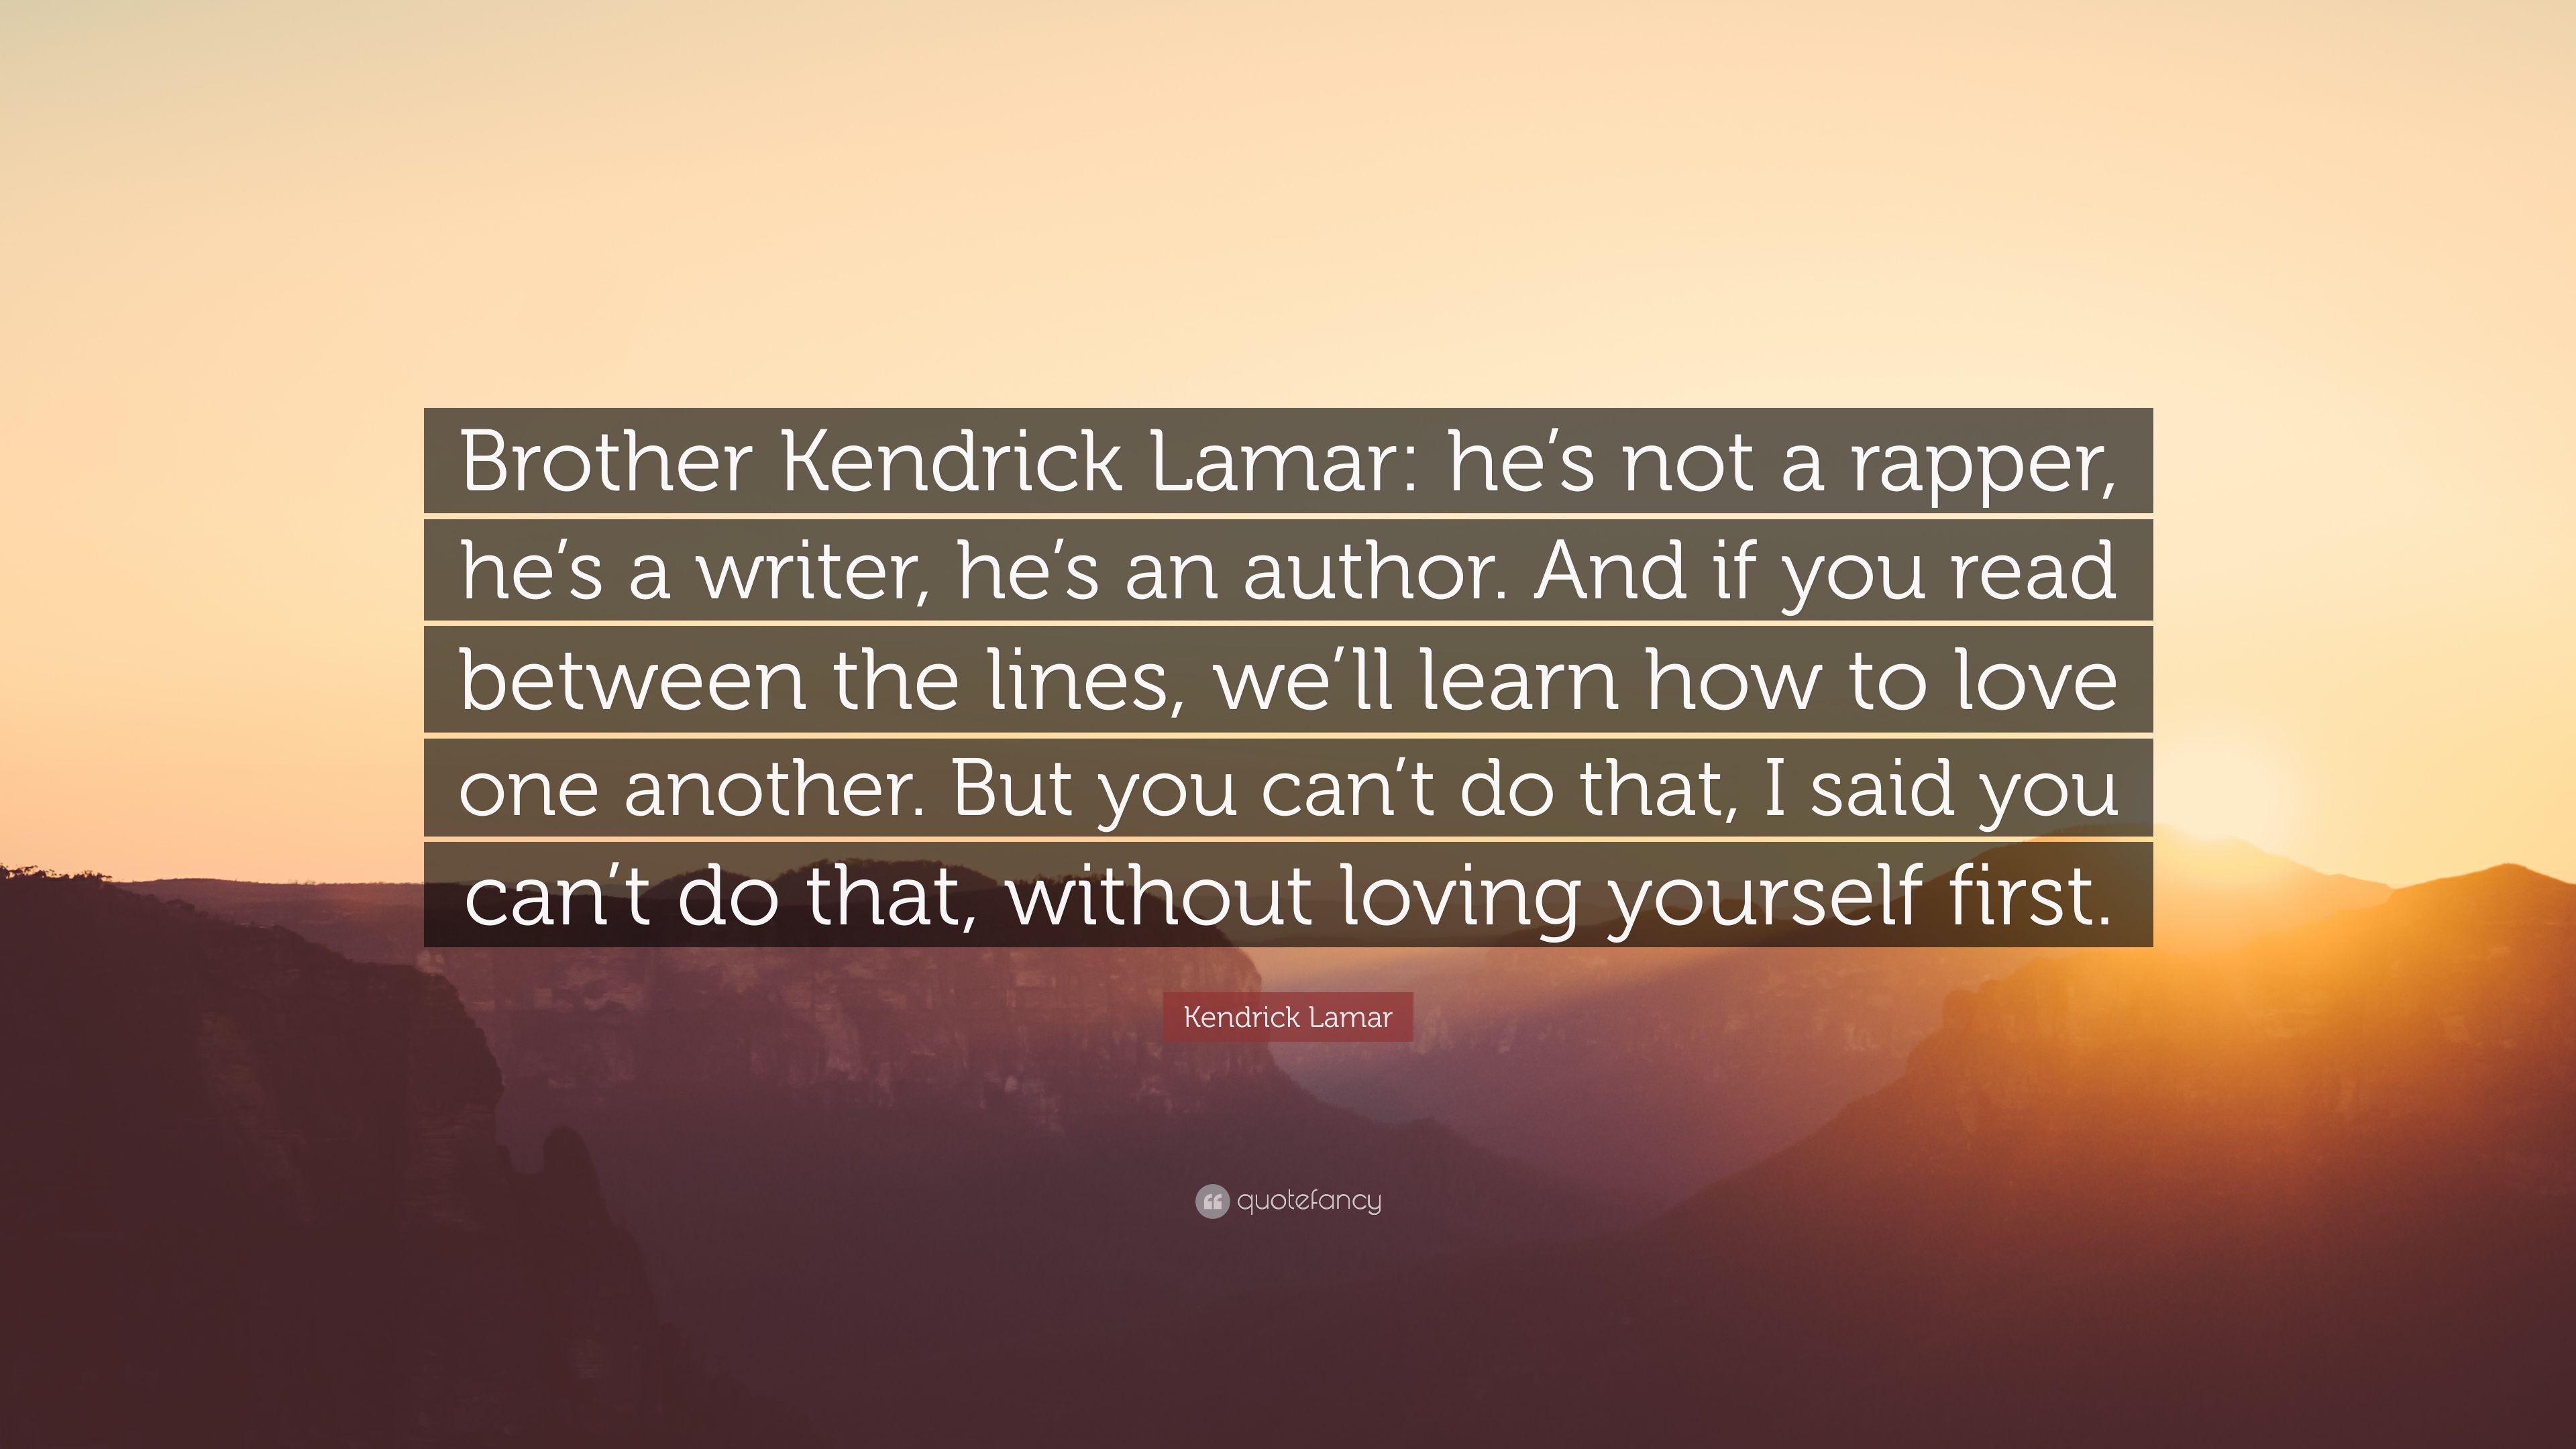 Kendrick Lamar Quote: “Brother Kendrick Lamar: he's not a rapper, he's a writer, he's an author. And if you read between the lines, we'll learn.” (7 wallpaper)